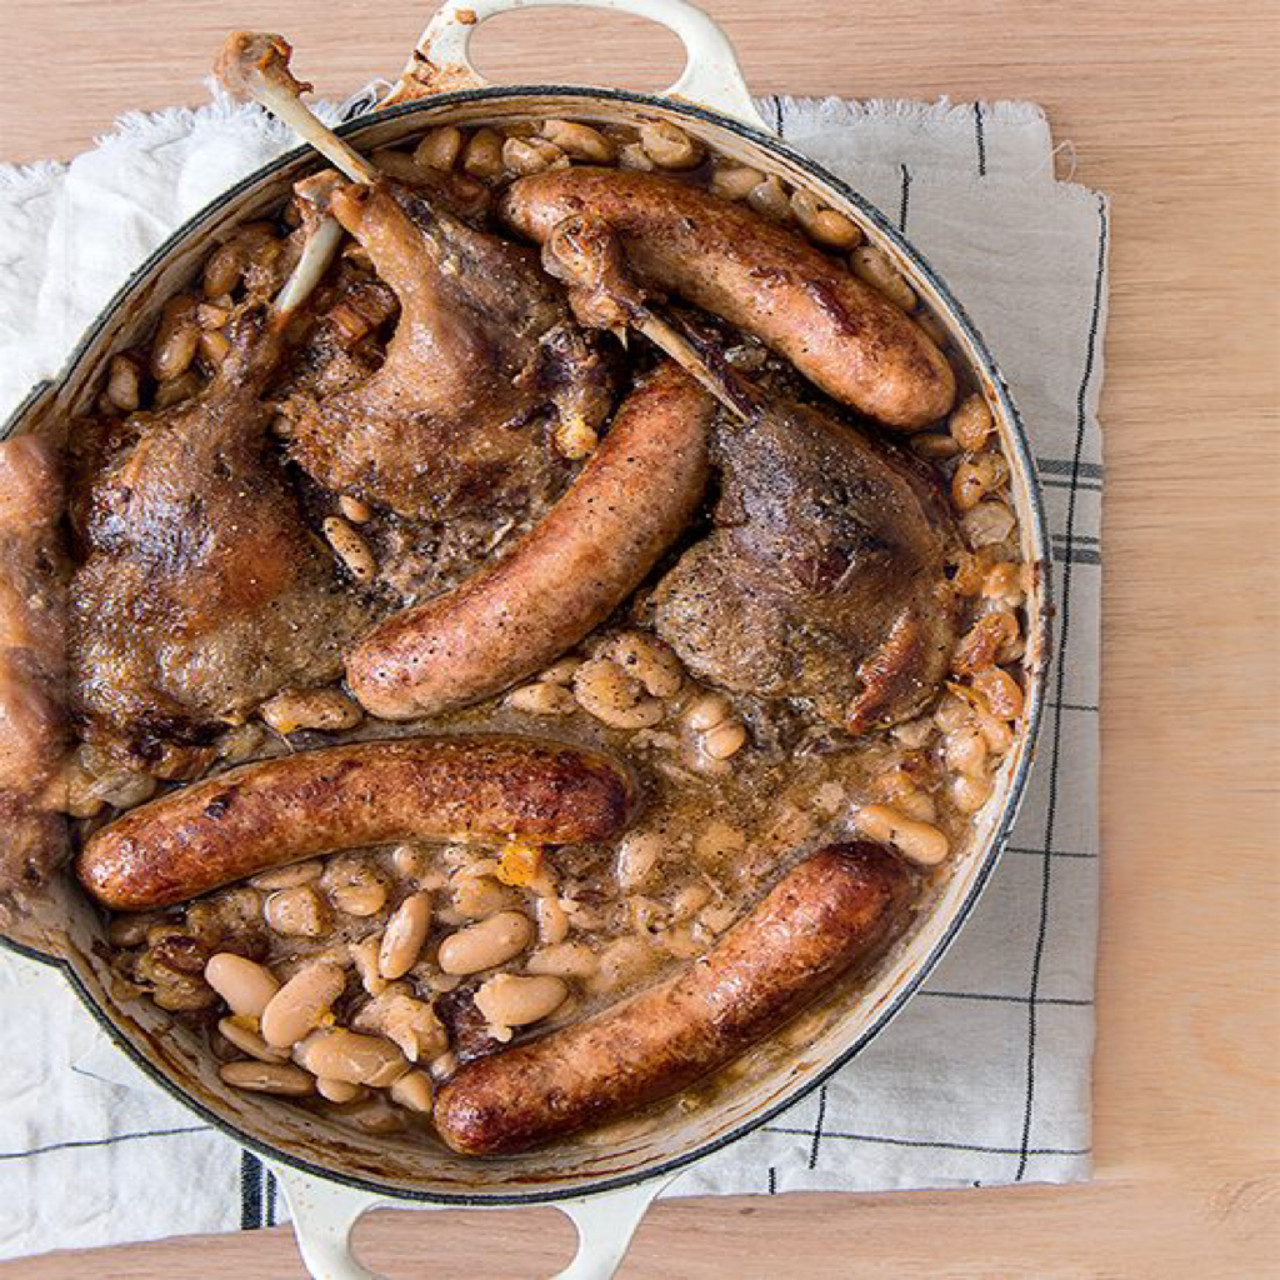 Toulouse-style Cassoulet